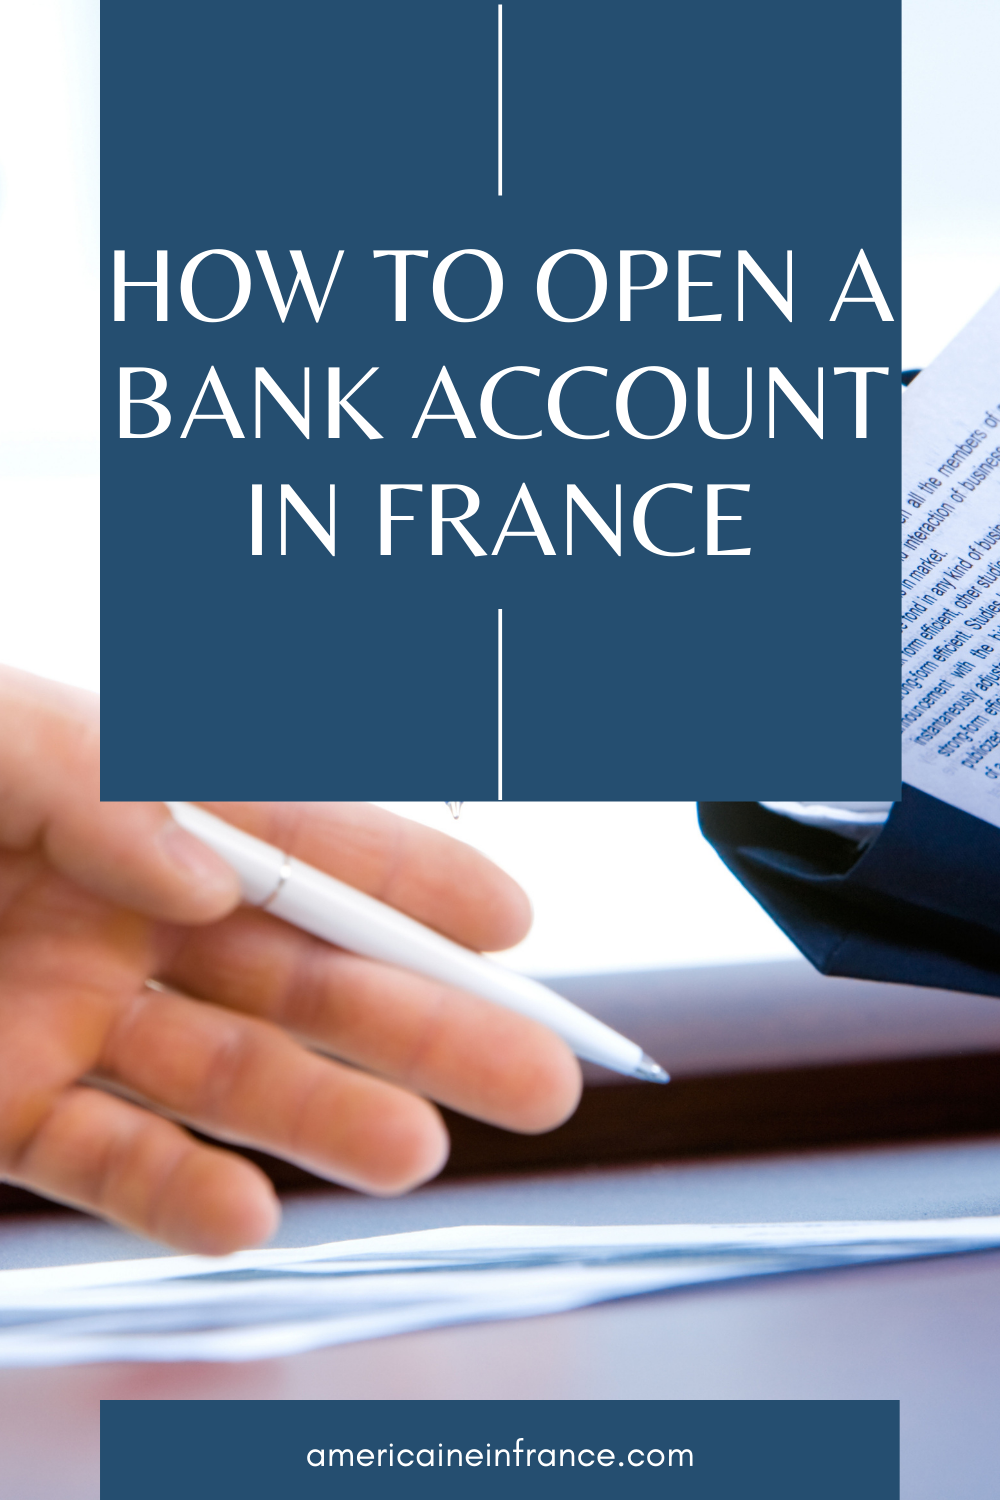 Into Online Banking? Opening a French Bank Account Online 